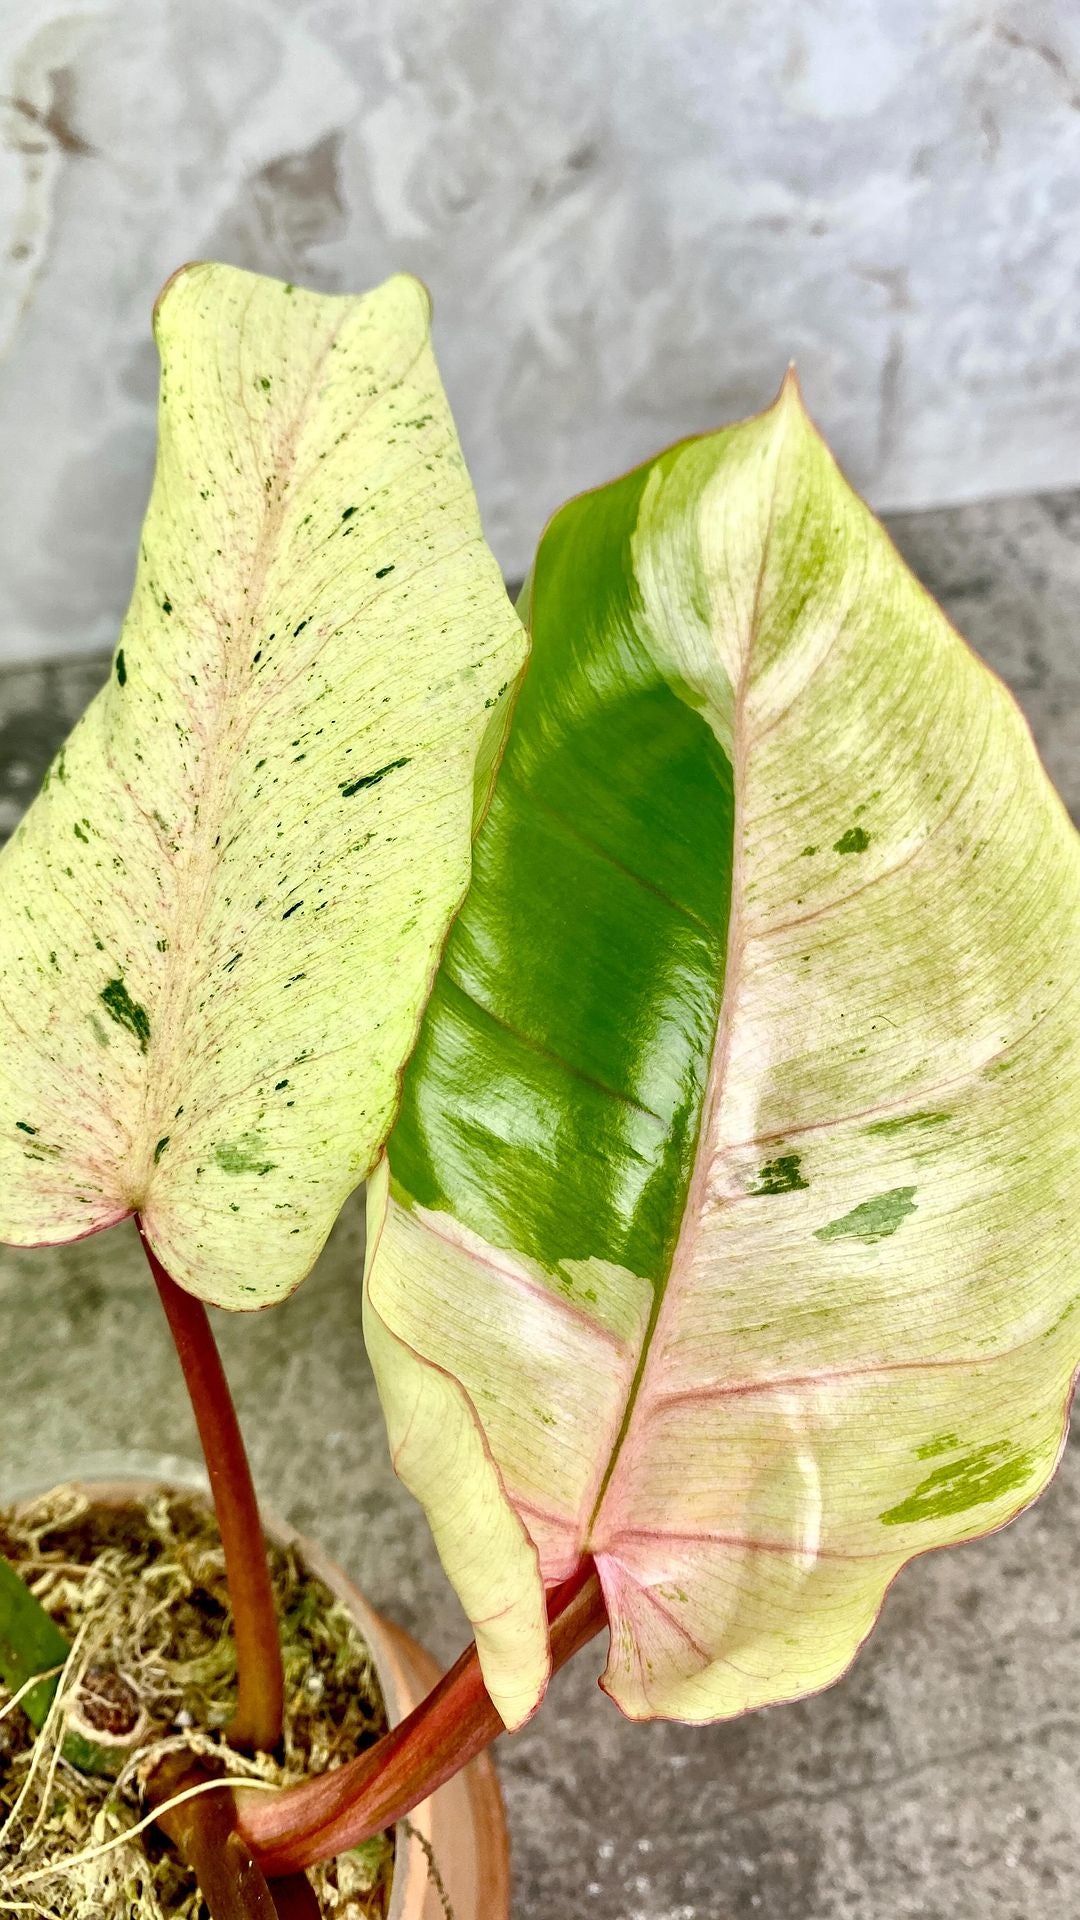 Philodendron Snowdrift Variegated 1 leaf 1 new growth